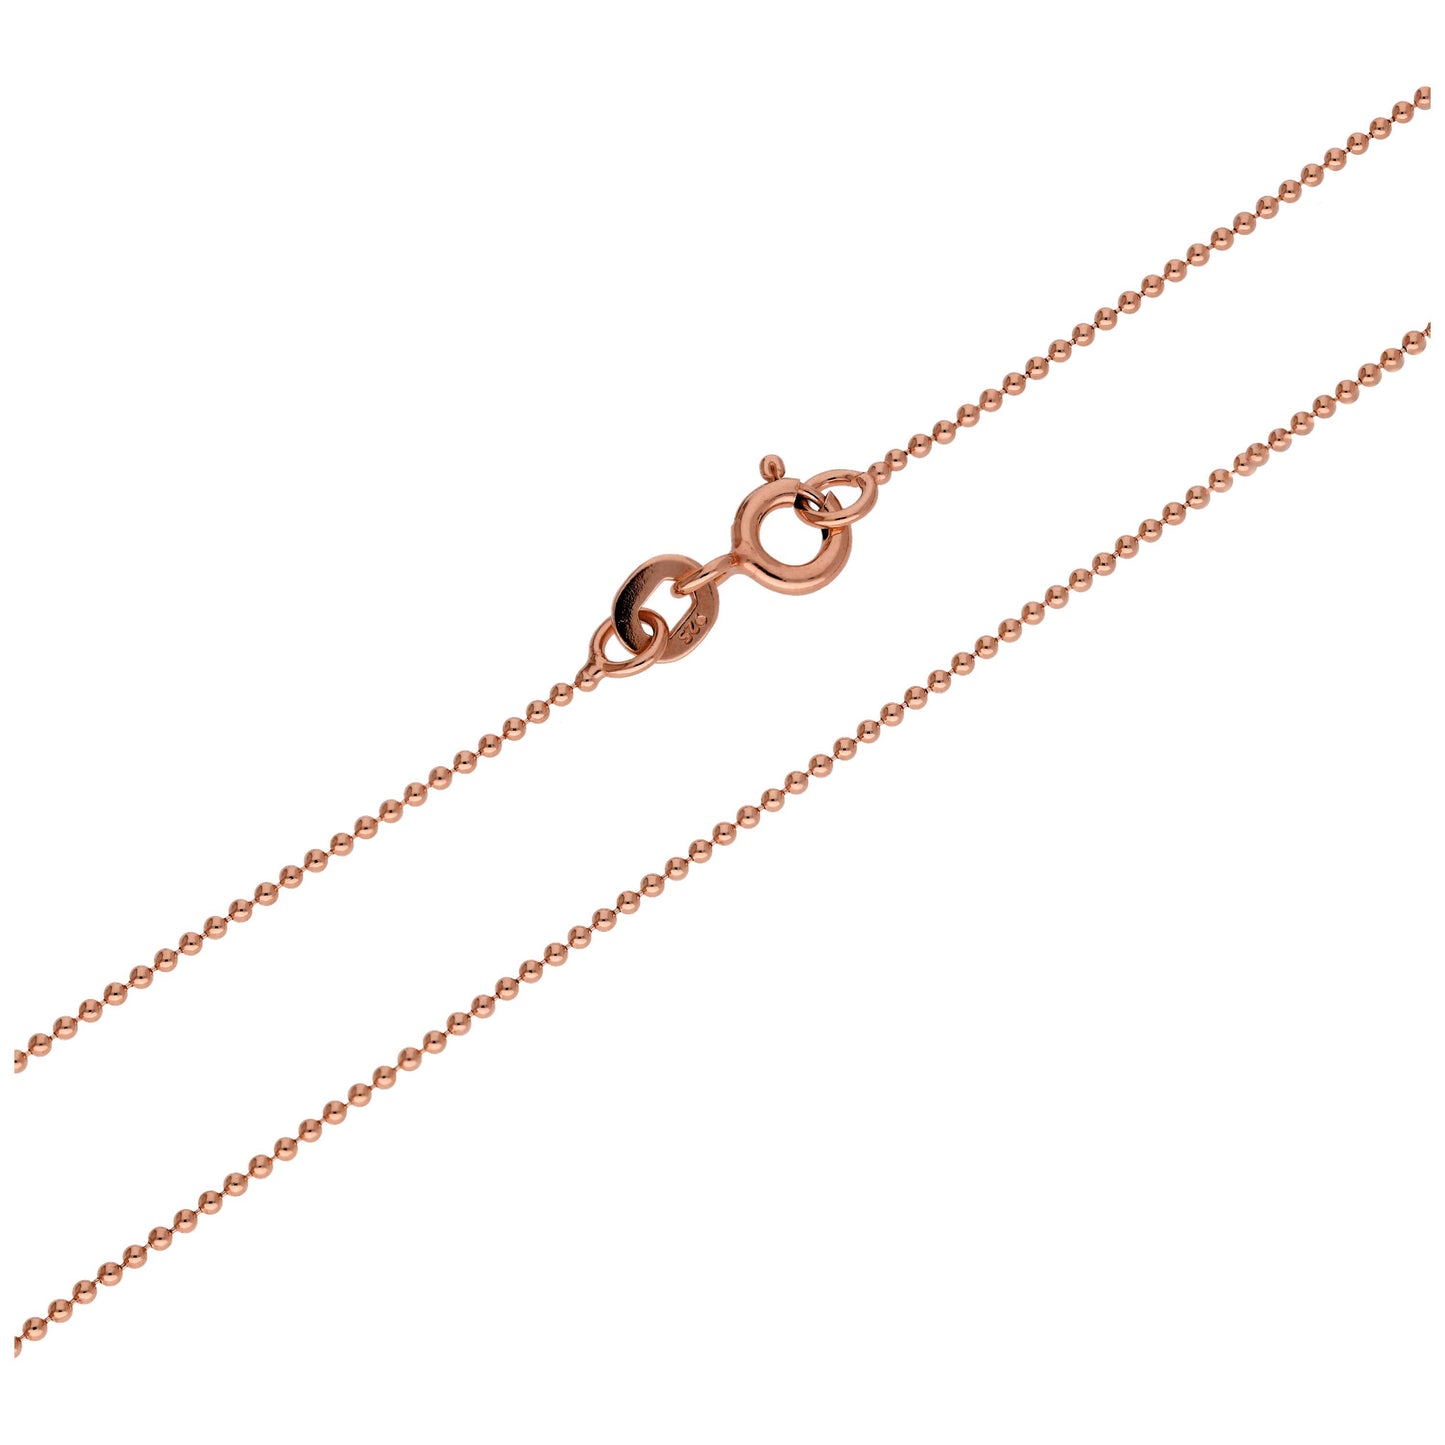 Rose Gold Plated Sterling Silver 1mm Bead Chain 22 Inches